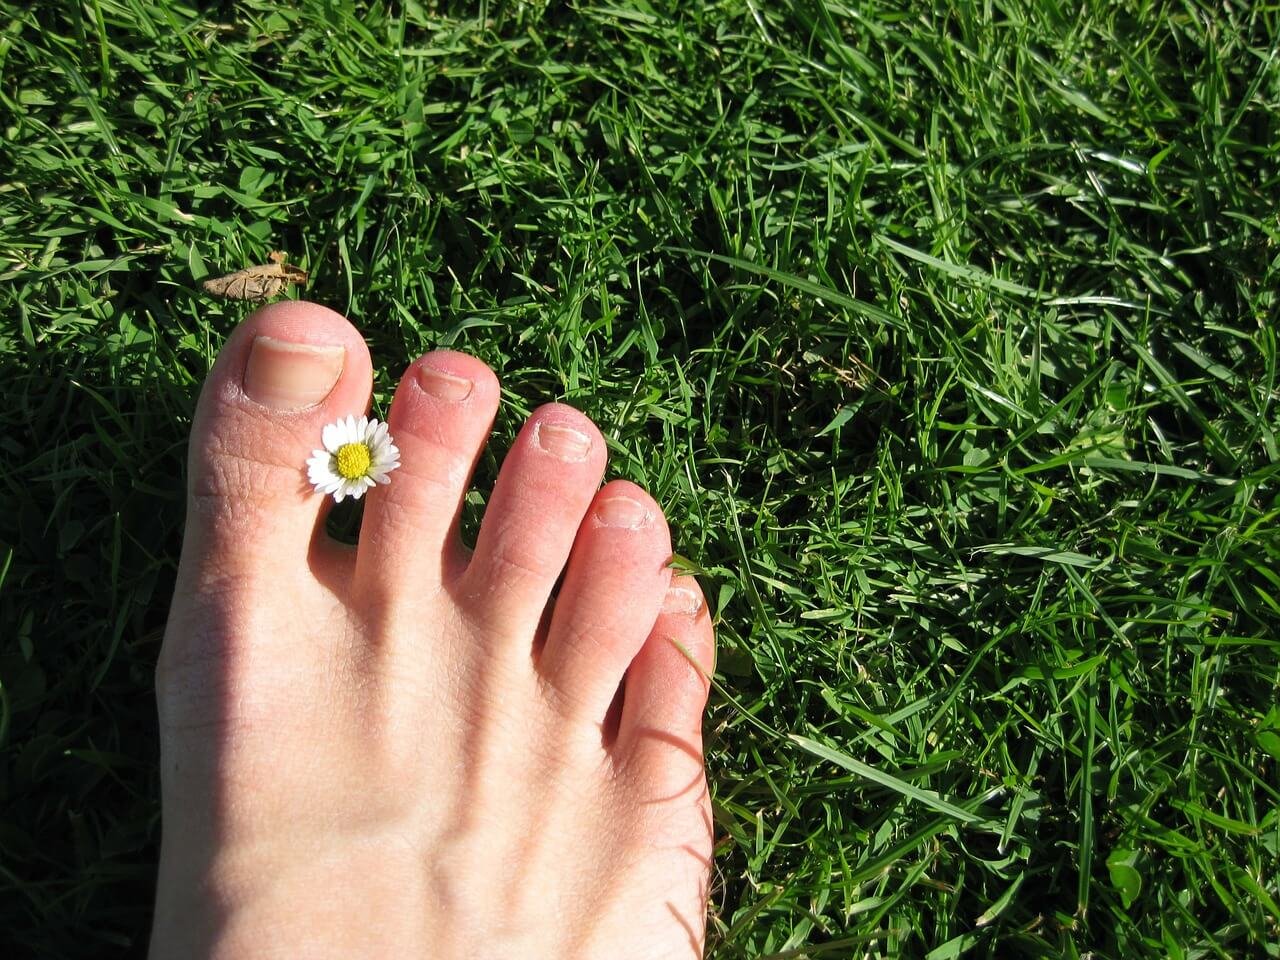 Care For Your Dry Feet With These Natural Remedies